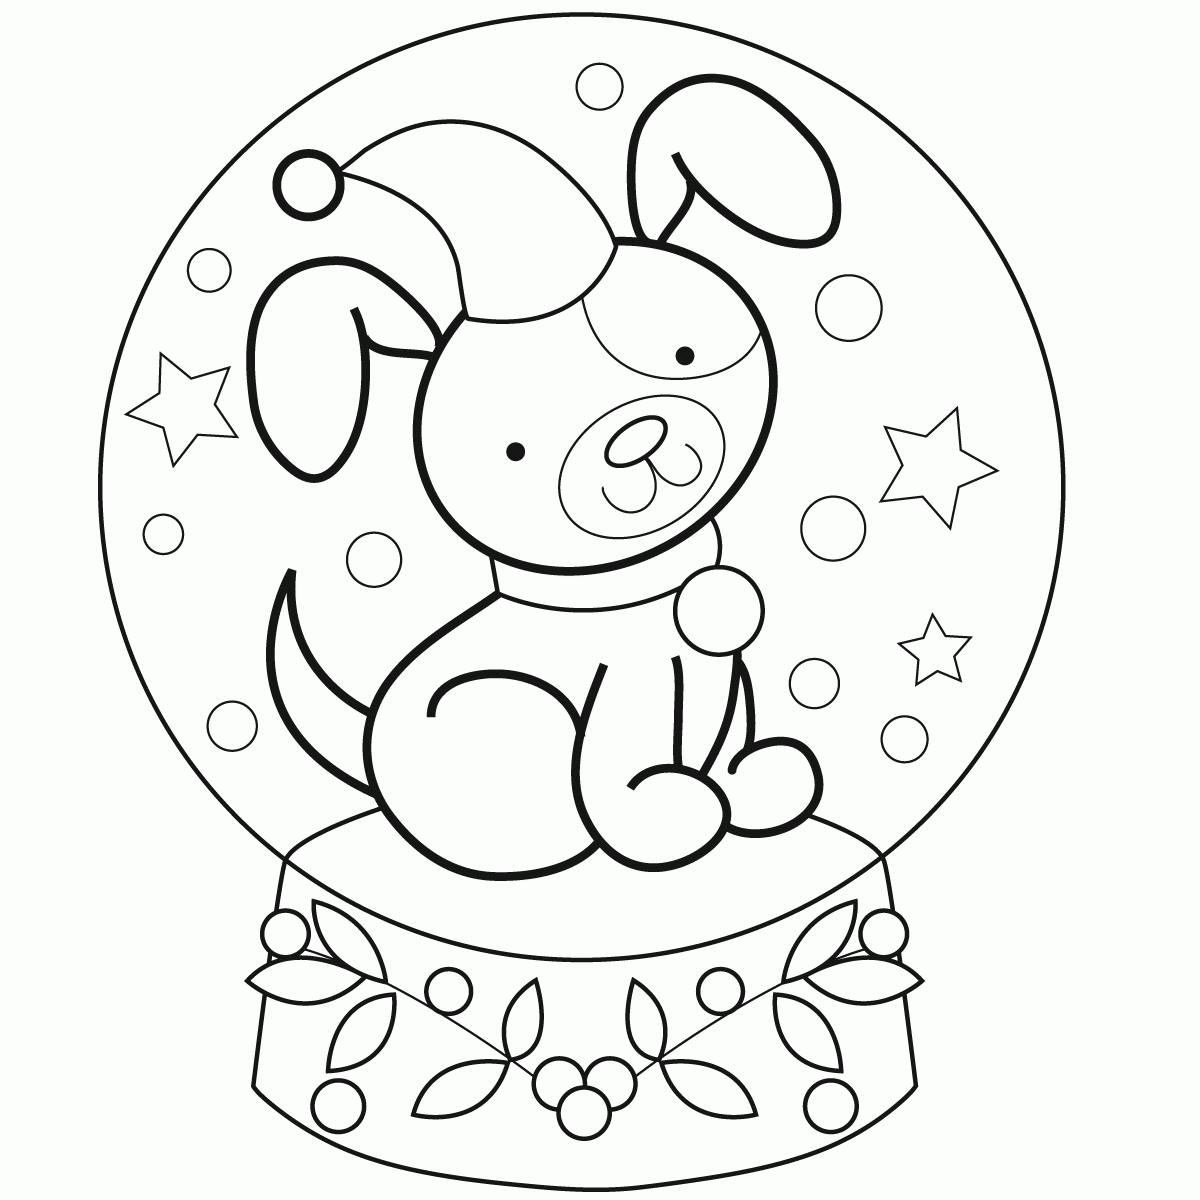 11 Pics of Coloring Pages Snow Globe - Winter Snow Globe Coloring ...